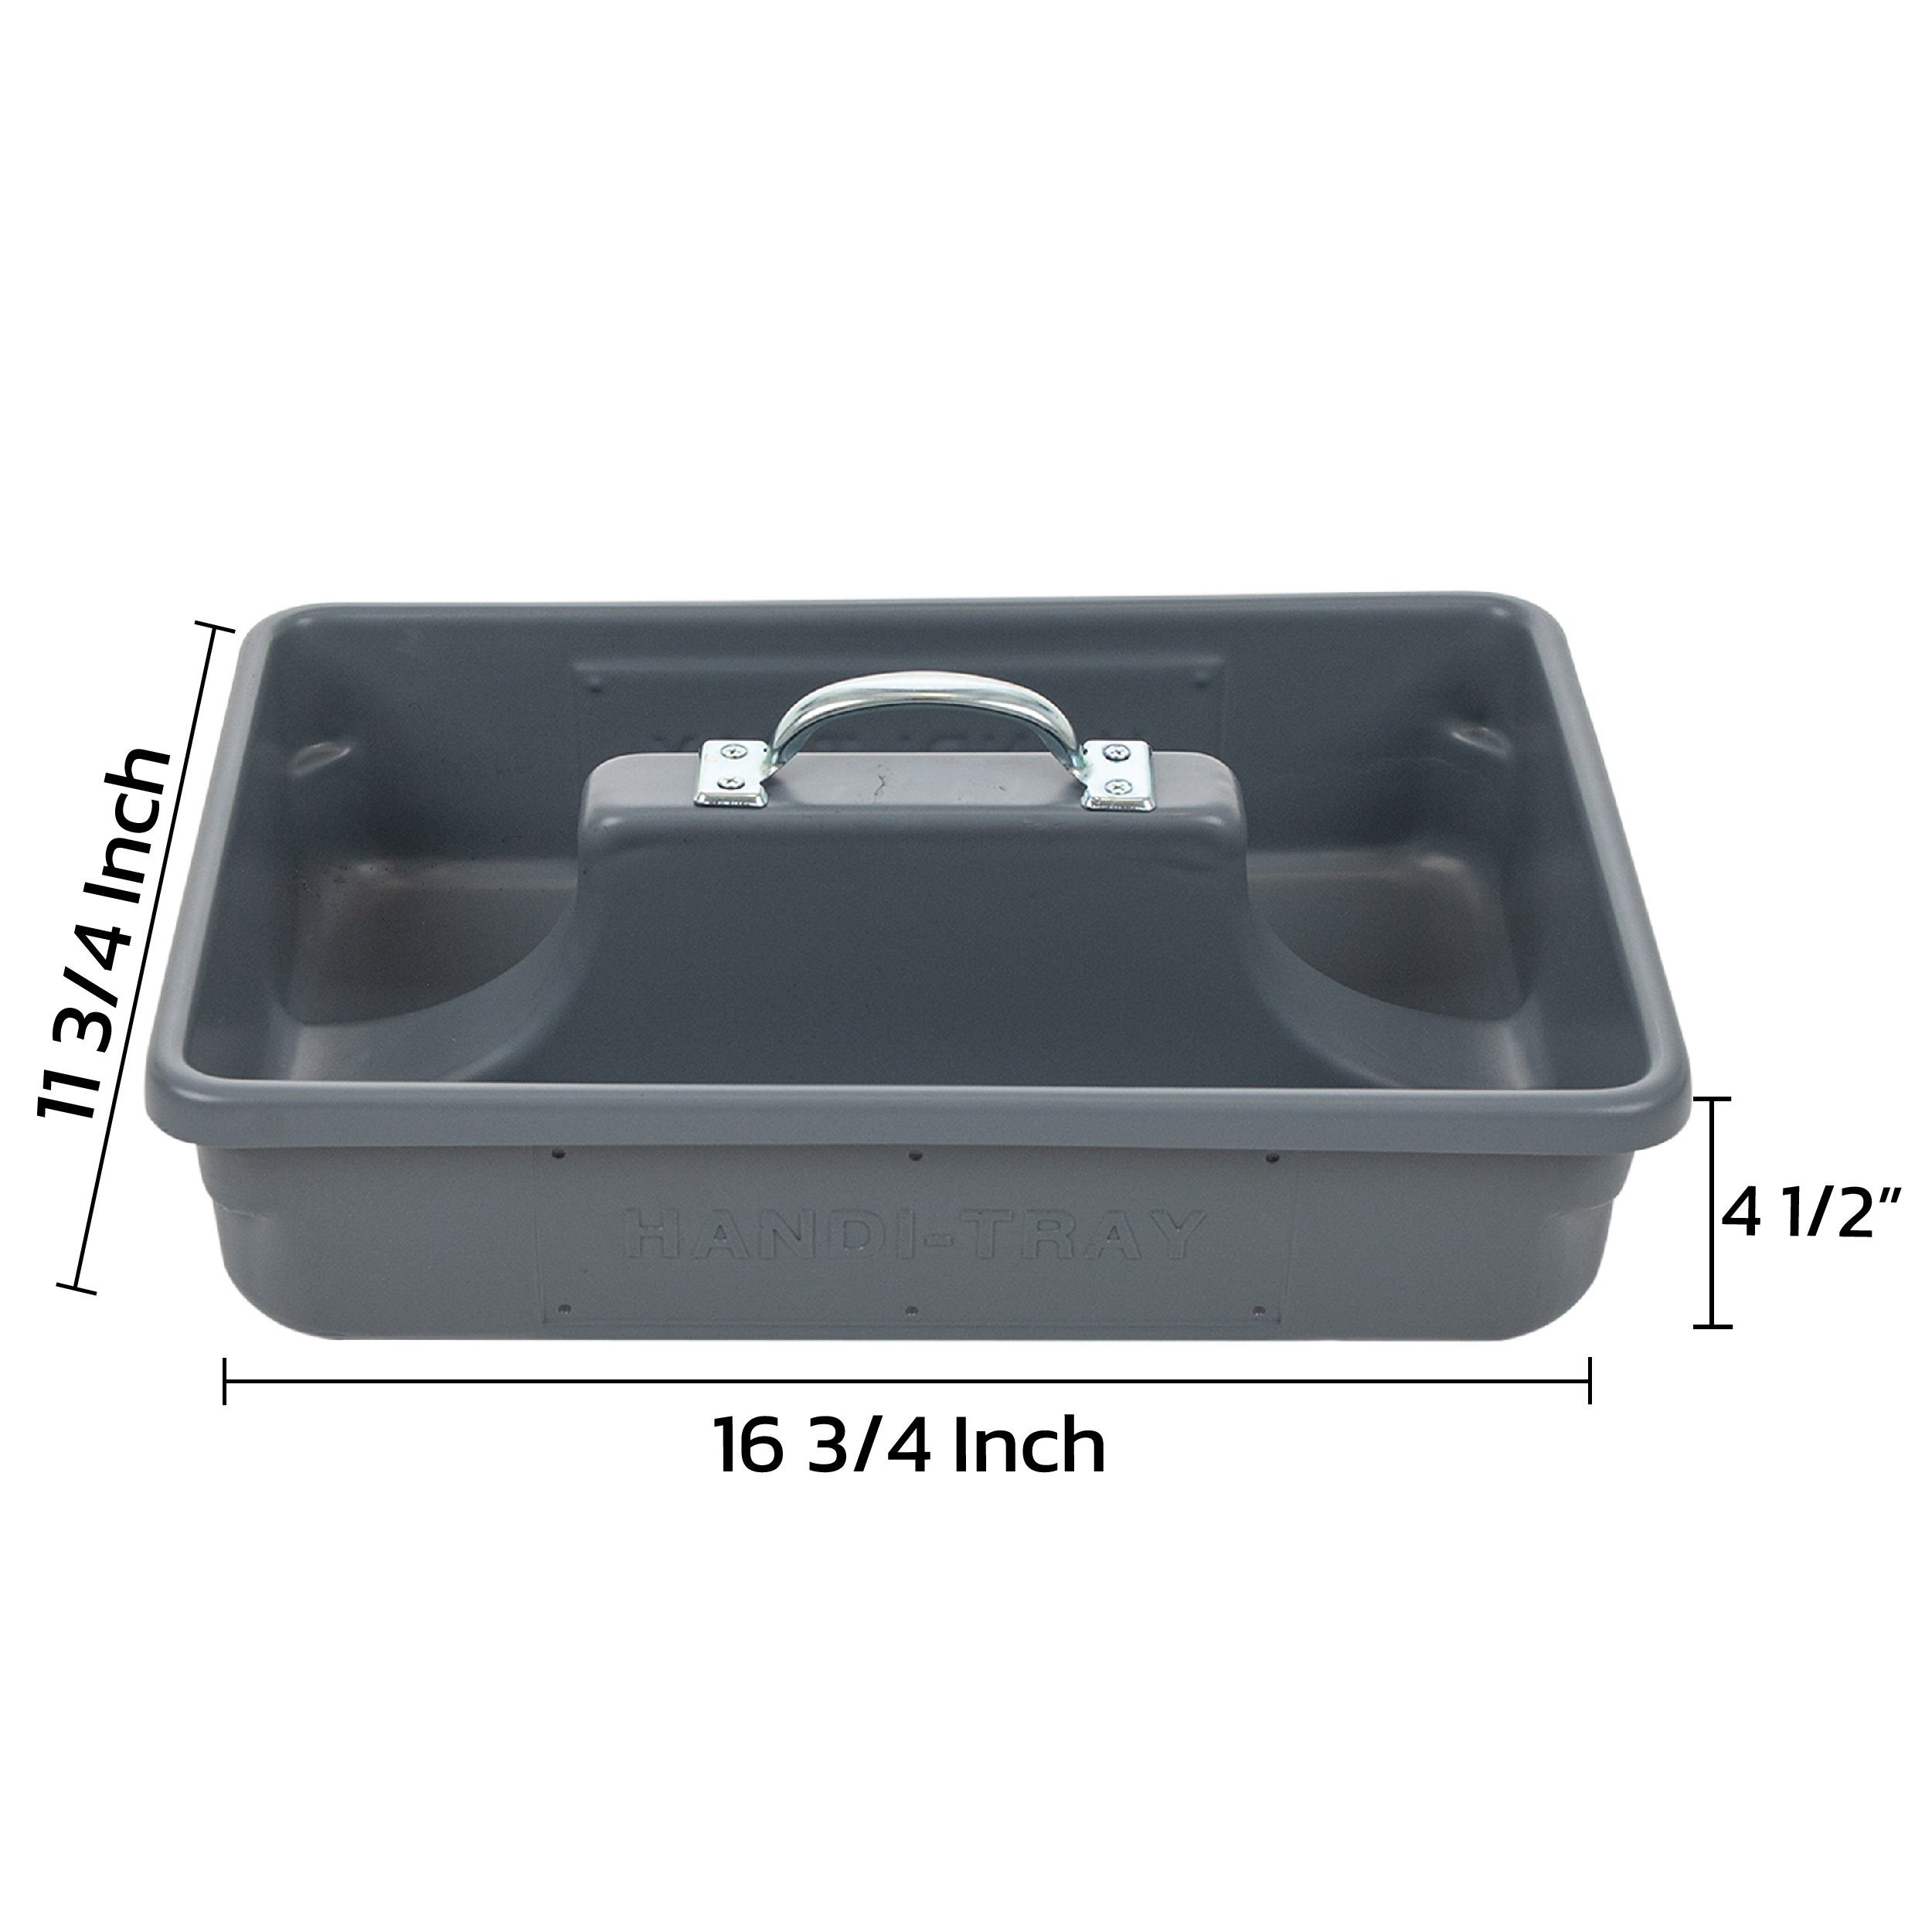 Grey Tote Tray/Org Tool Tray 15 x 9 x 5 comes w/6 Dividers – JB Products